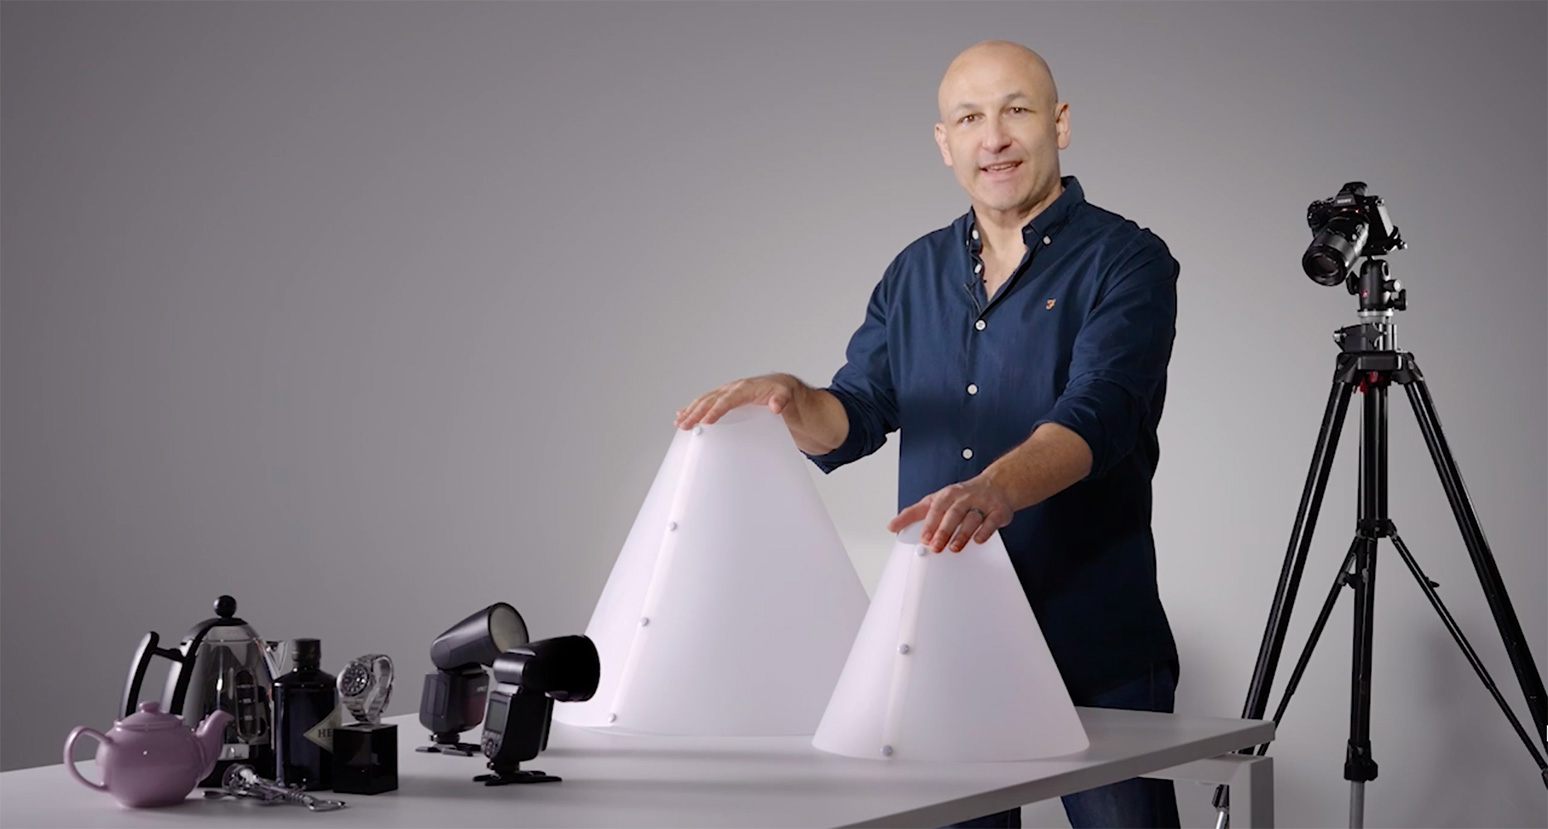 Karl Taylor's Product Photography Light Cones